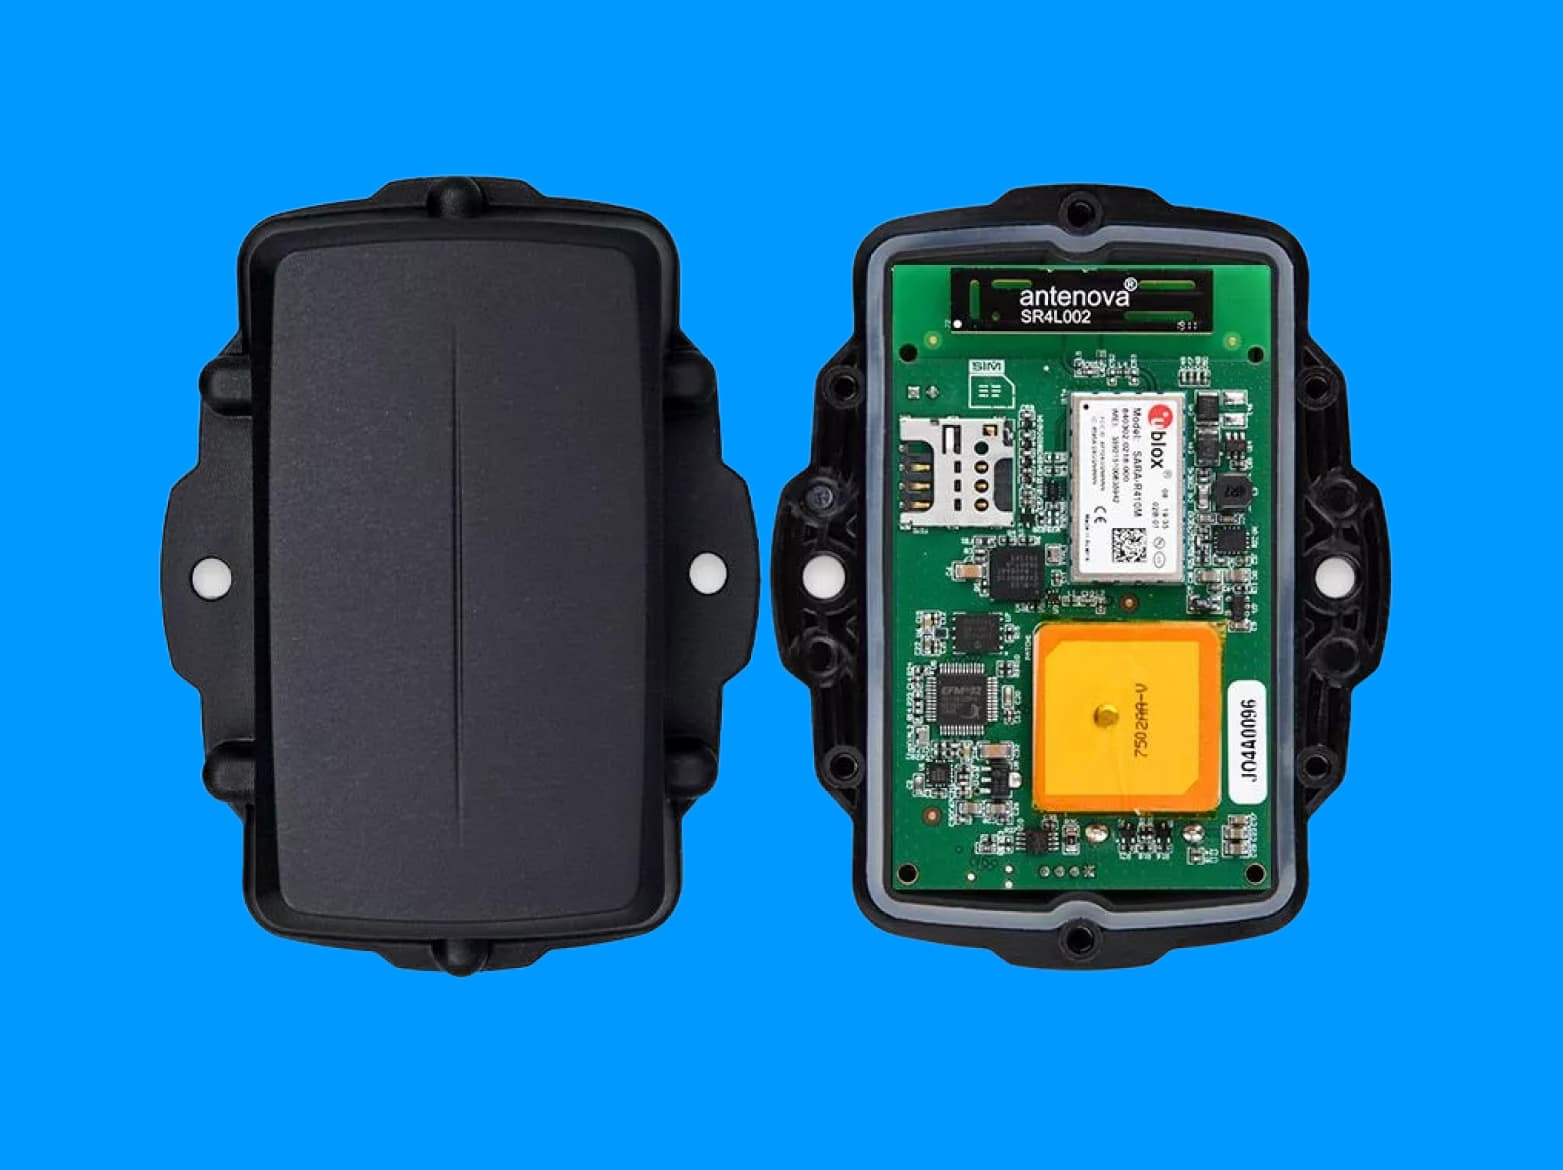 Picture showcasing the interior of one of Inseego's fleet tracking devices.